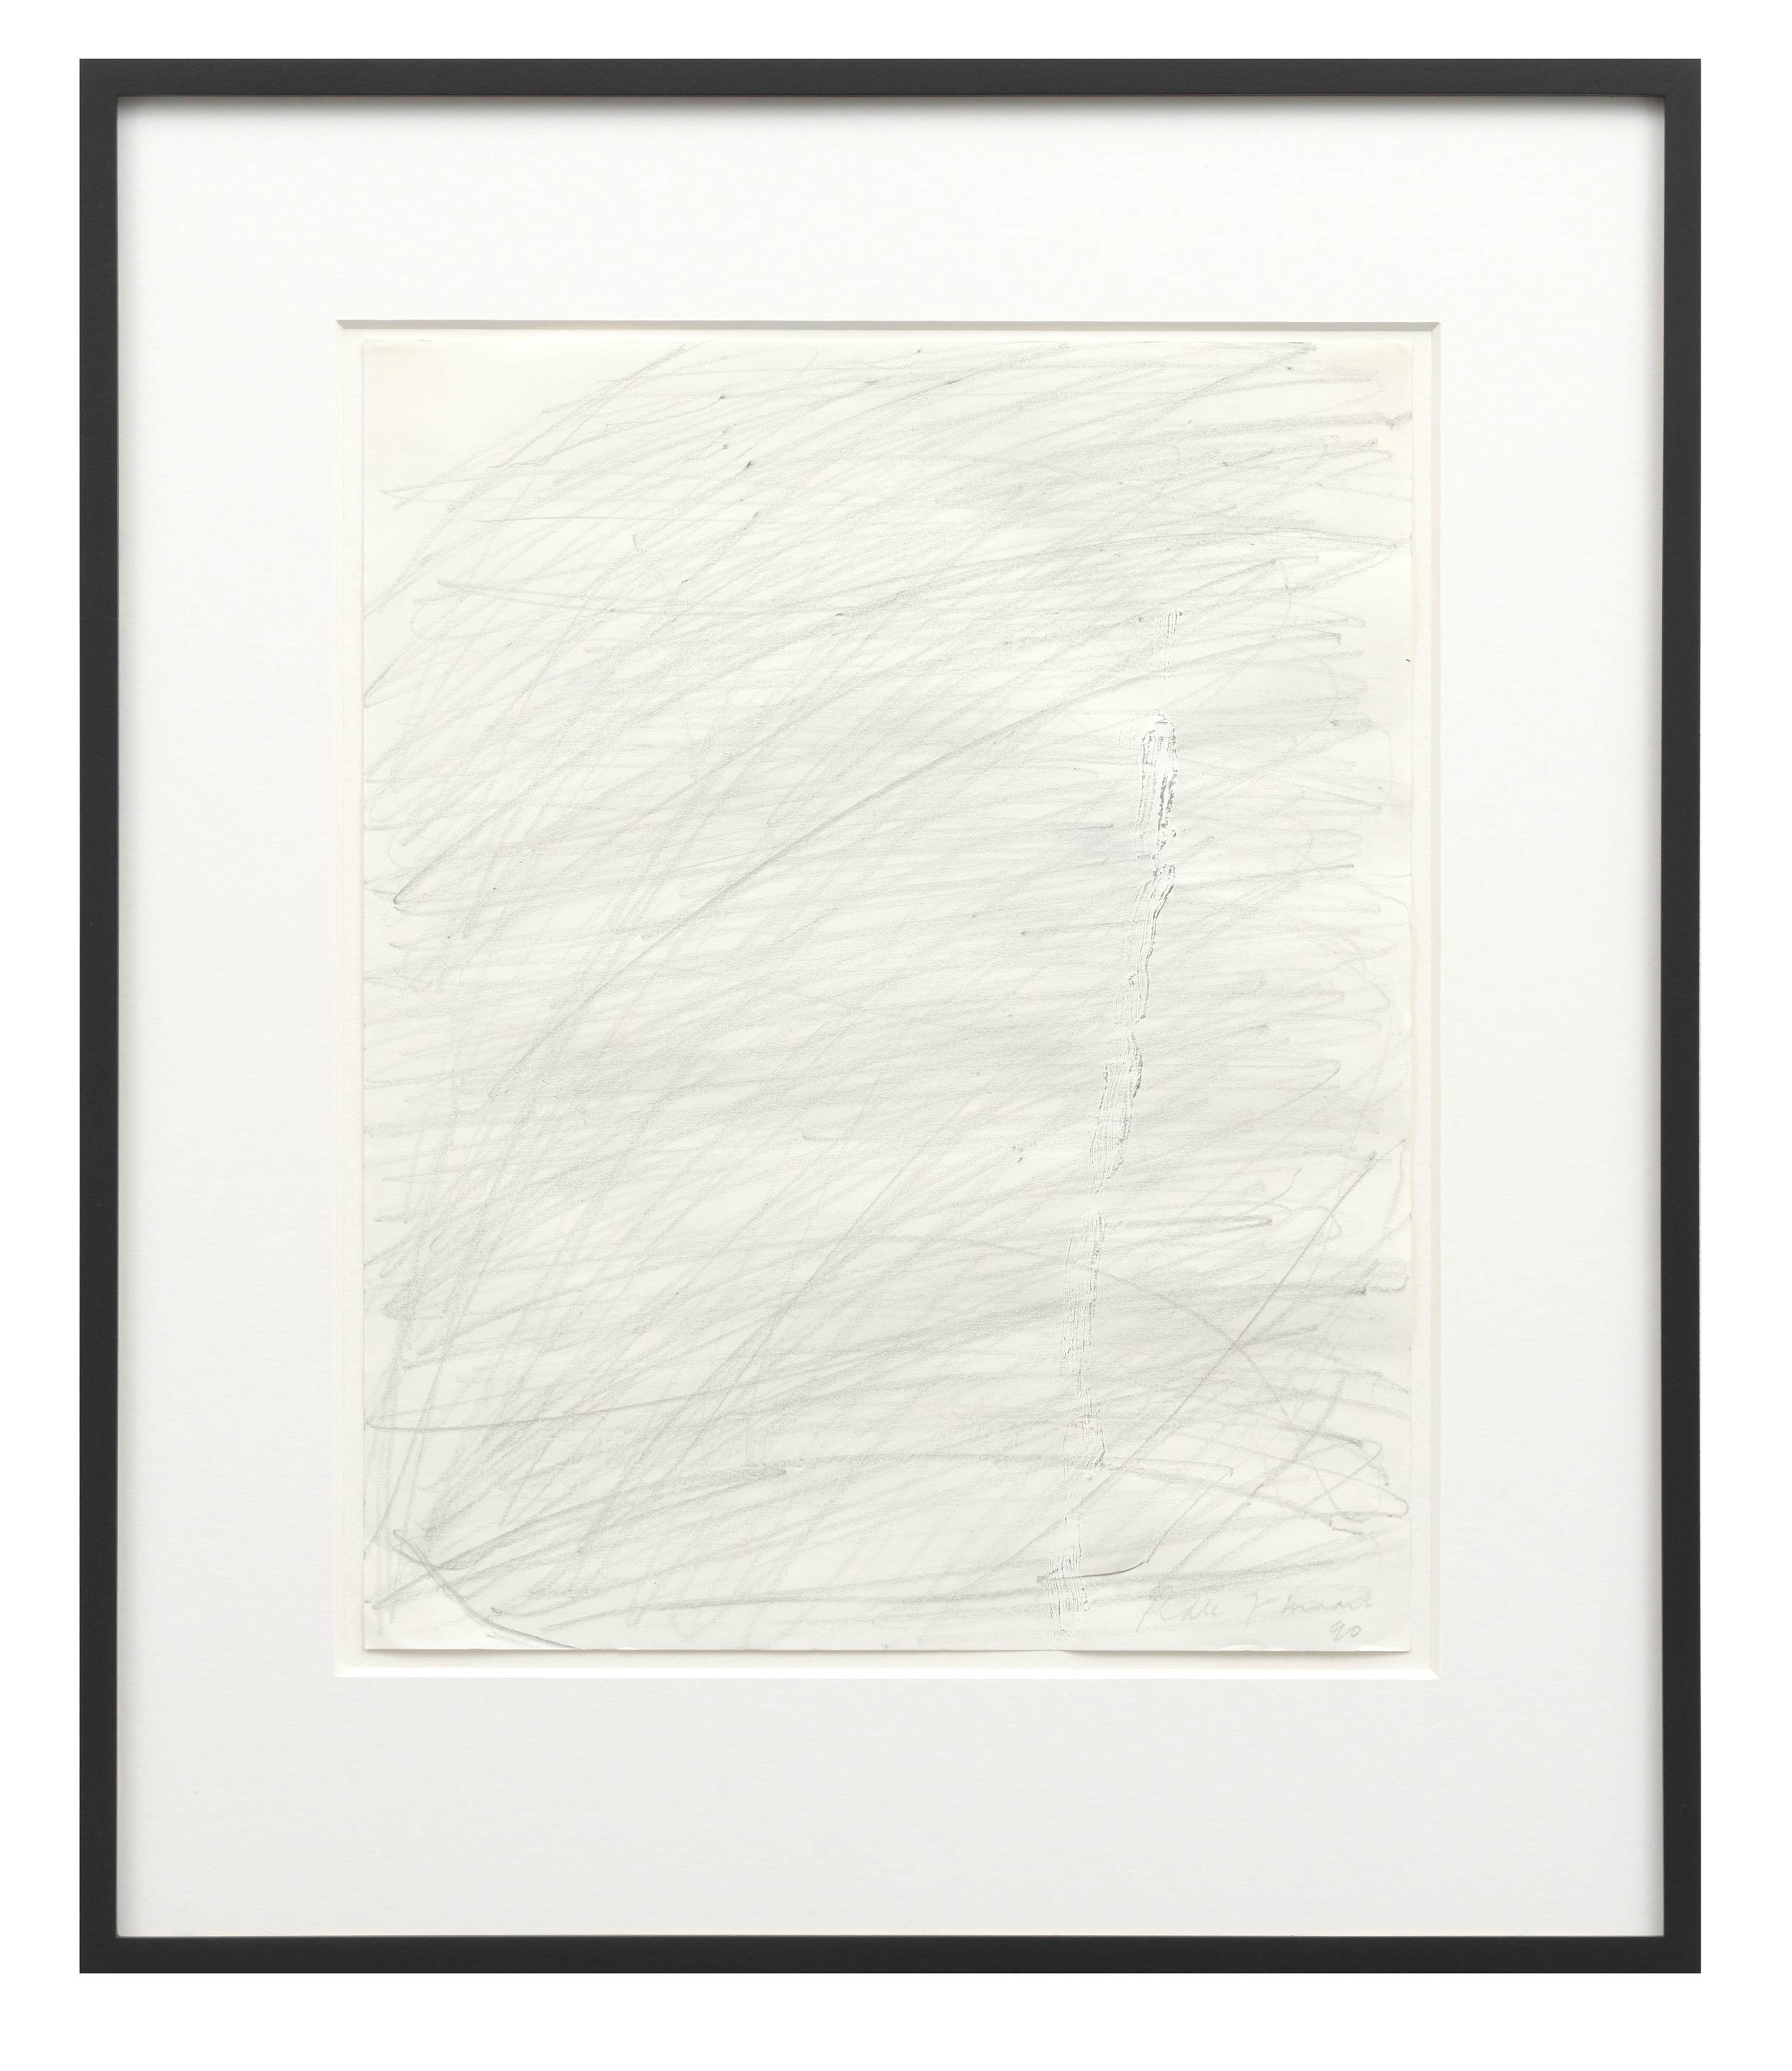 Raoul De KeyserMarch 7, 1990, 1990pencil and gesso on paper27.5 x 34 cm | 10 3/4 x 13 1/2 in